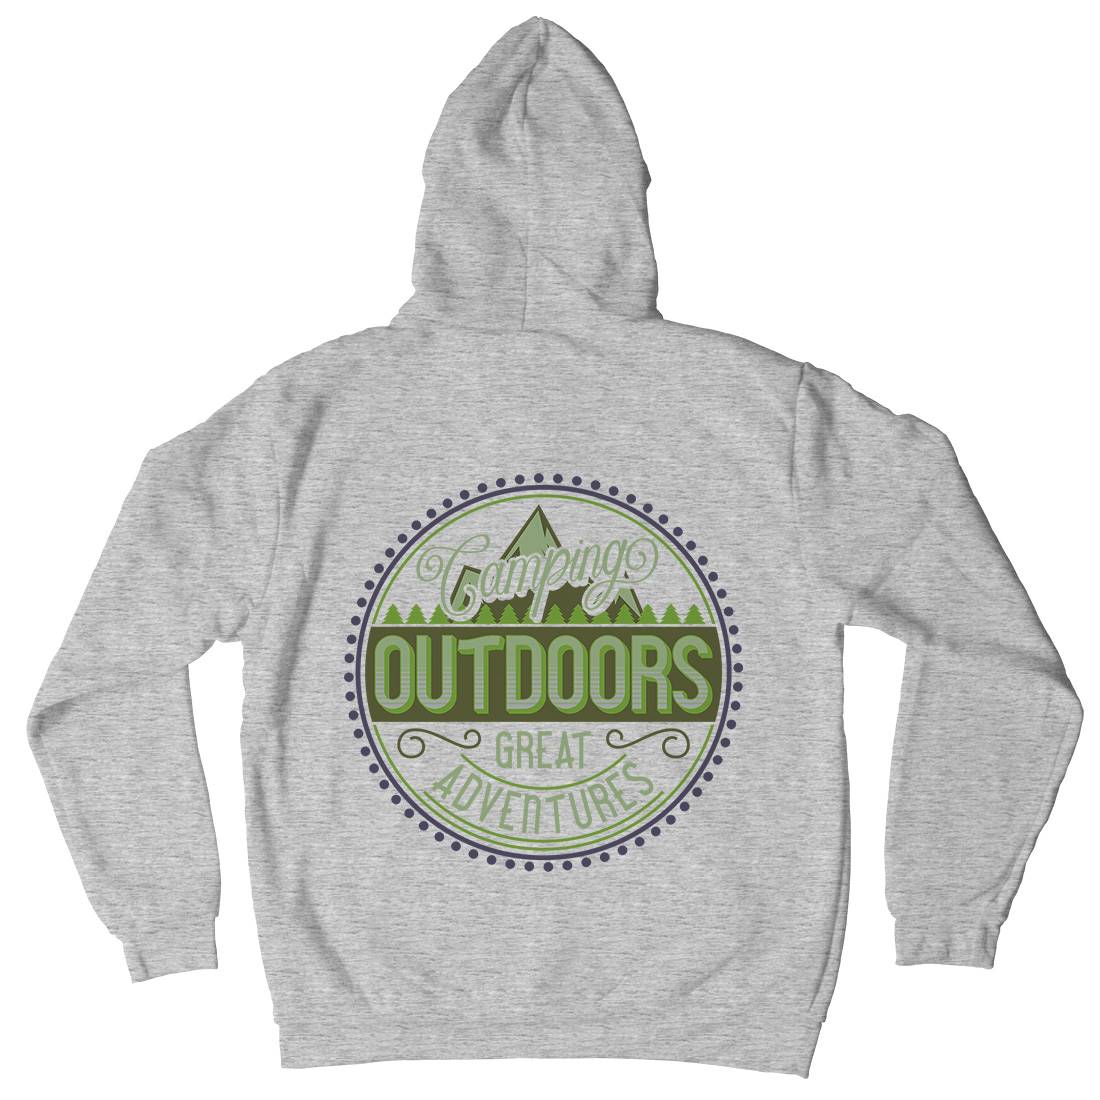 Outdoors Mens Hoodie With Pocket Nature B326